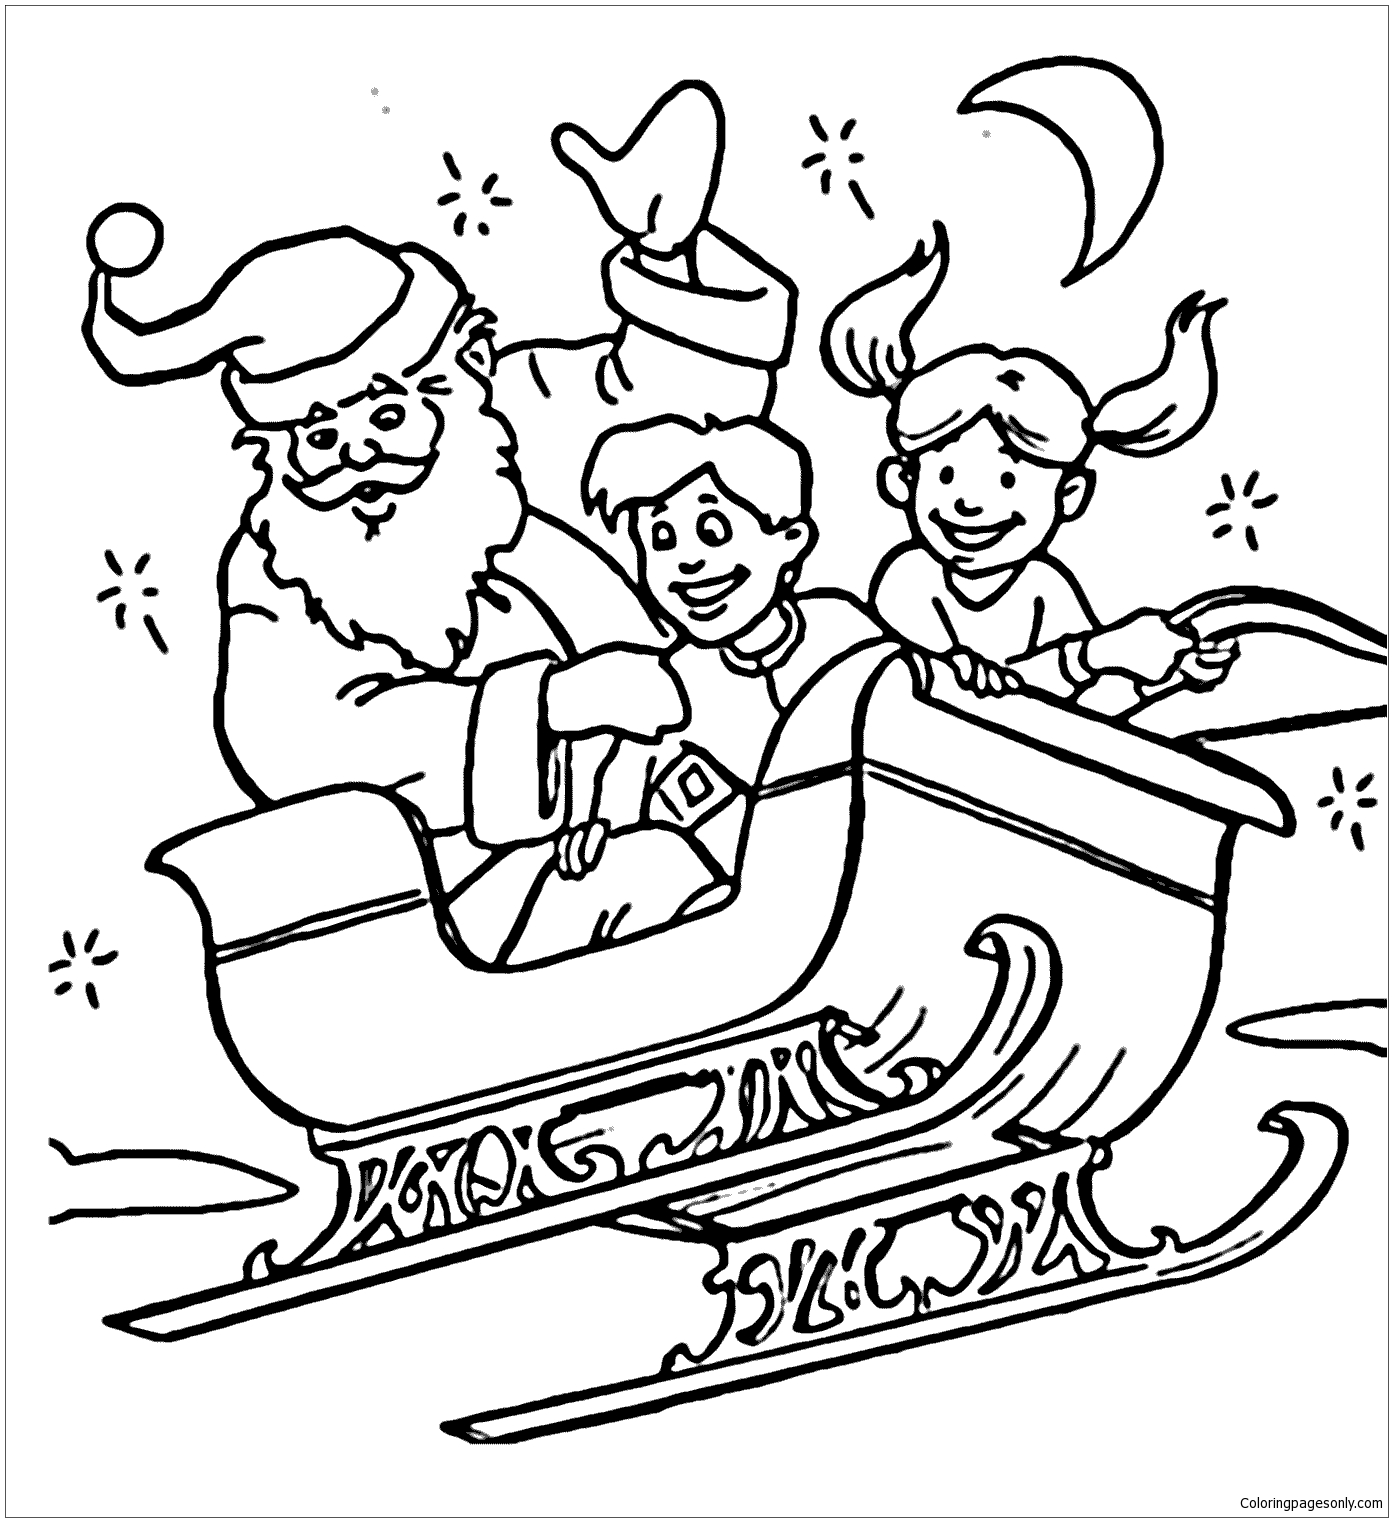 Santa Claus And Children Flying In Sleigh Coloring Pages Holidays Coloring Pages Coloring Pages For Kids And Adults